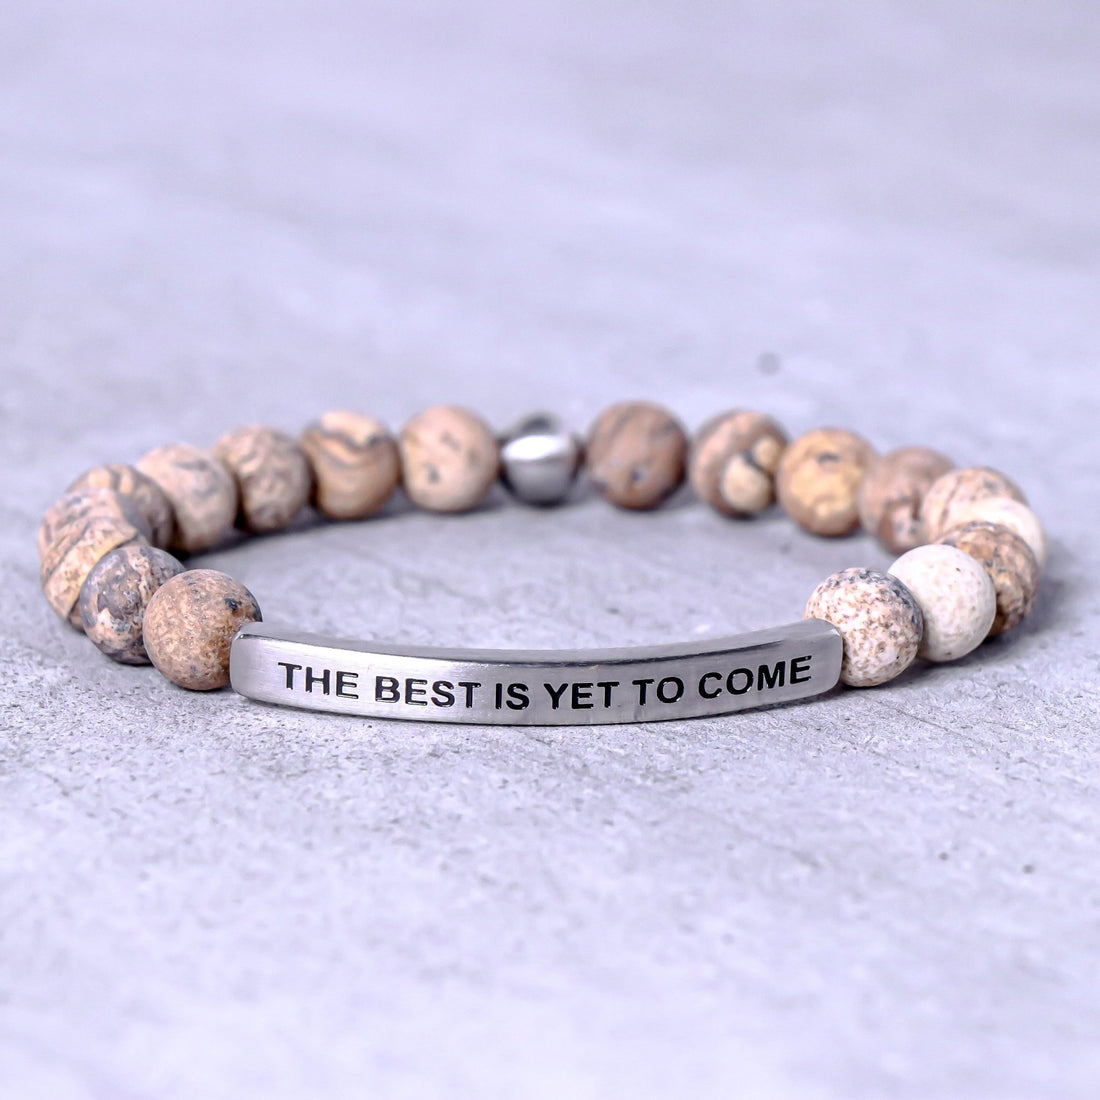 THE BEST IS YET TO COME - Mens Collection - Inspiration Co.